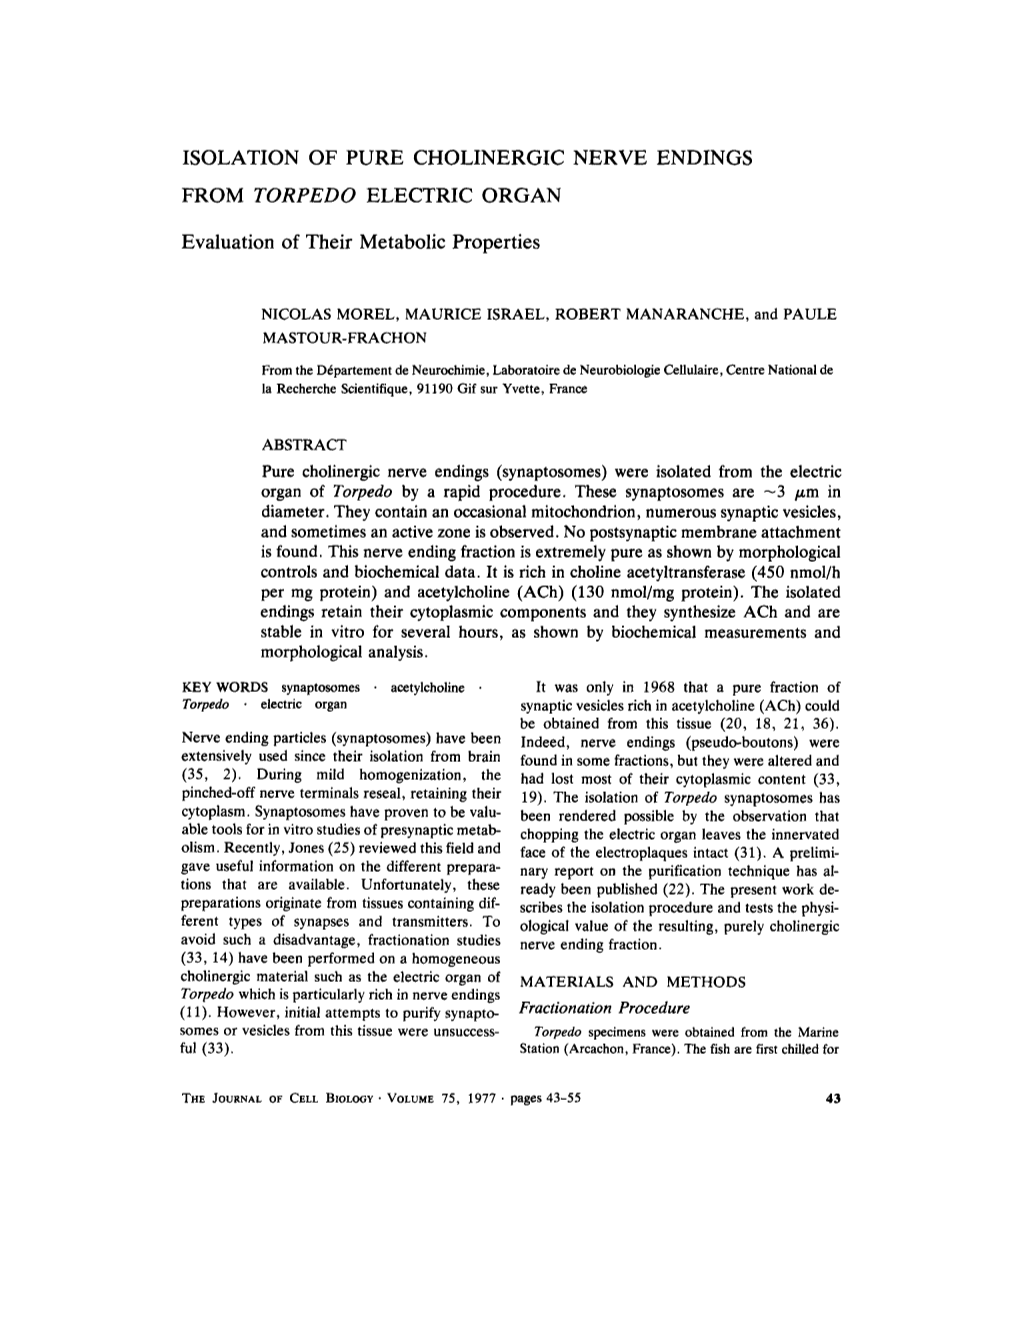 Isolation of Pure Cholinergic Nerve Endings from Torpedo Electric Organ